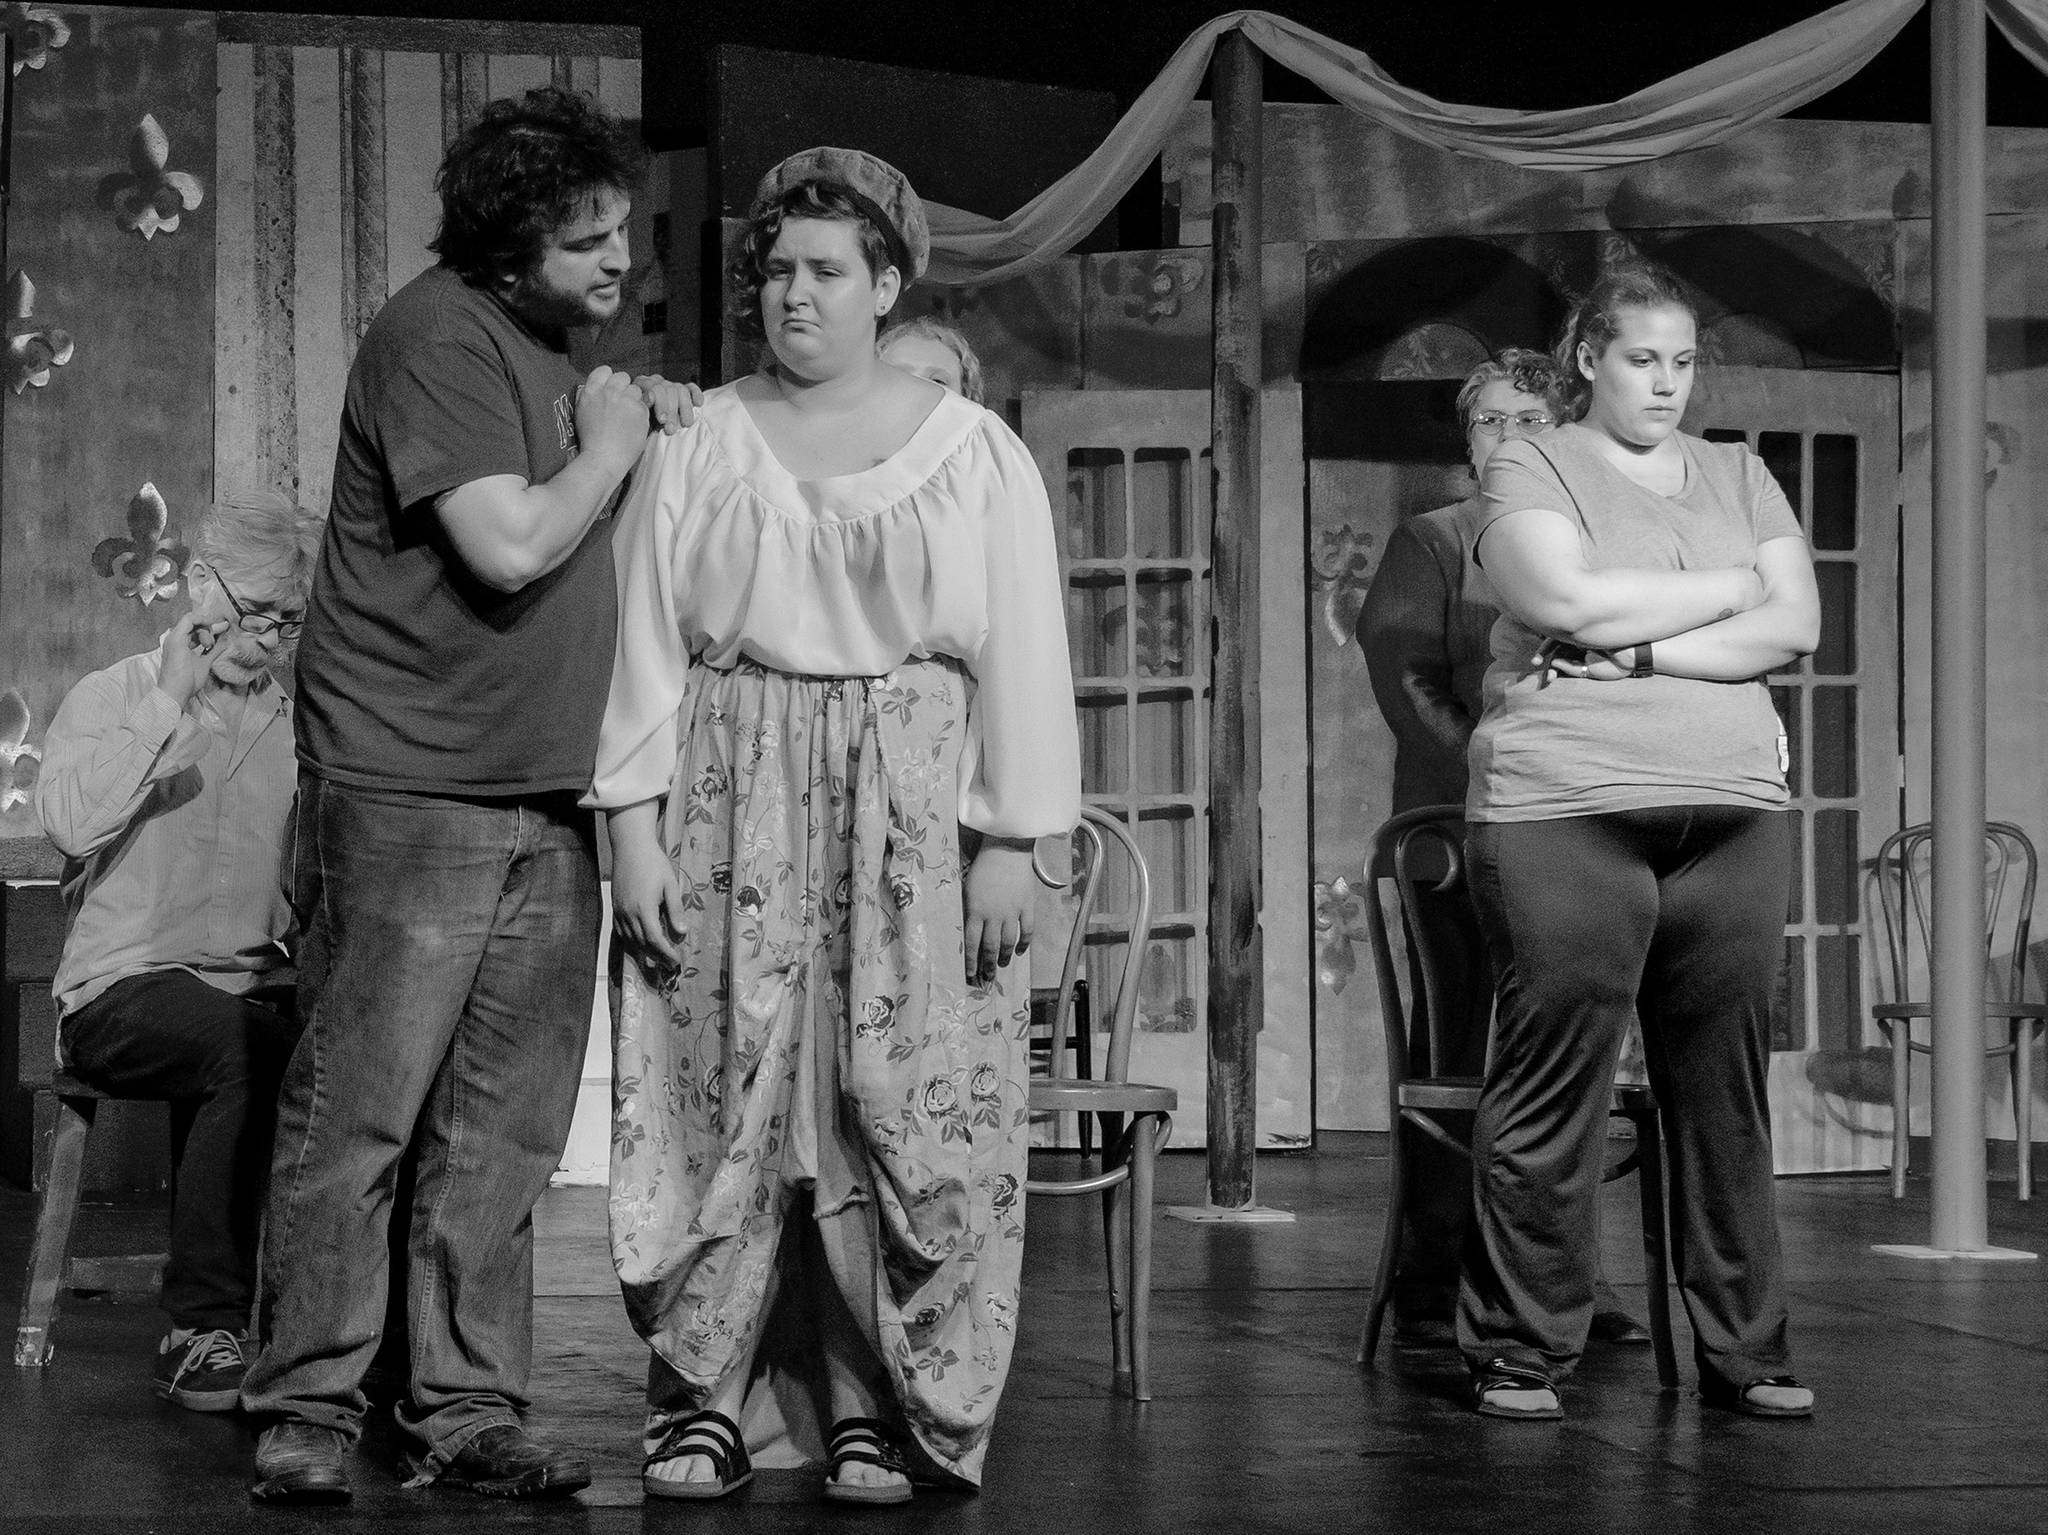 Actors rehearse a scene from William Shakespeare’s “Much Ado About Nothing” on June 24, 2019, at the Pier One Theatre in Homer, Alaska. From left to right are 4. Peter Sheppard as Dogberry, Lydia Thomas as Borachio, and Alison Rambo as Conrad. (Photo by Sue Briggs)